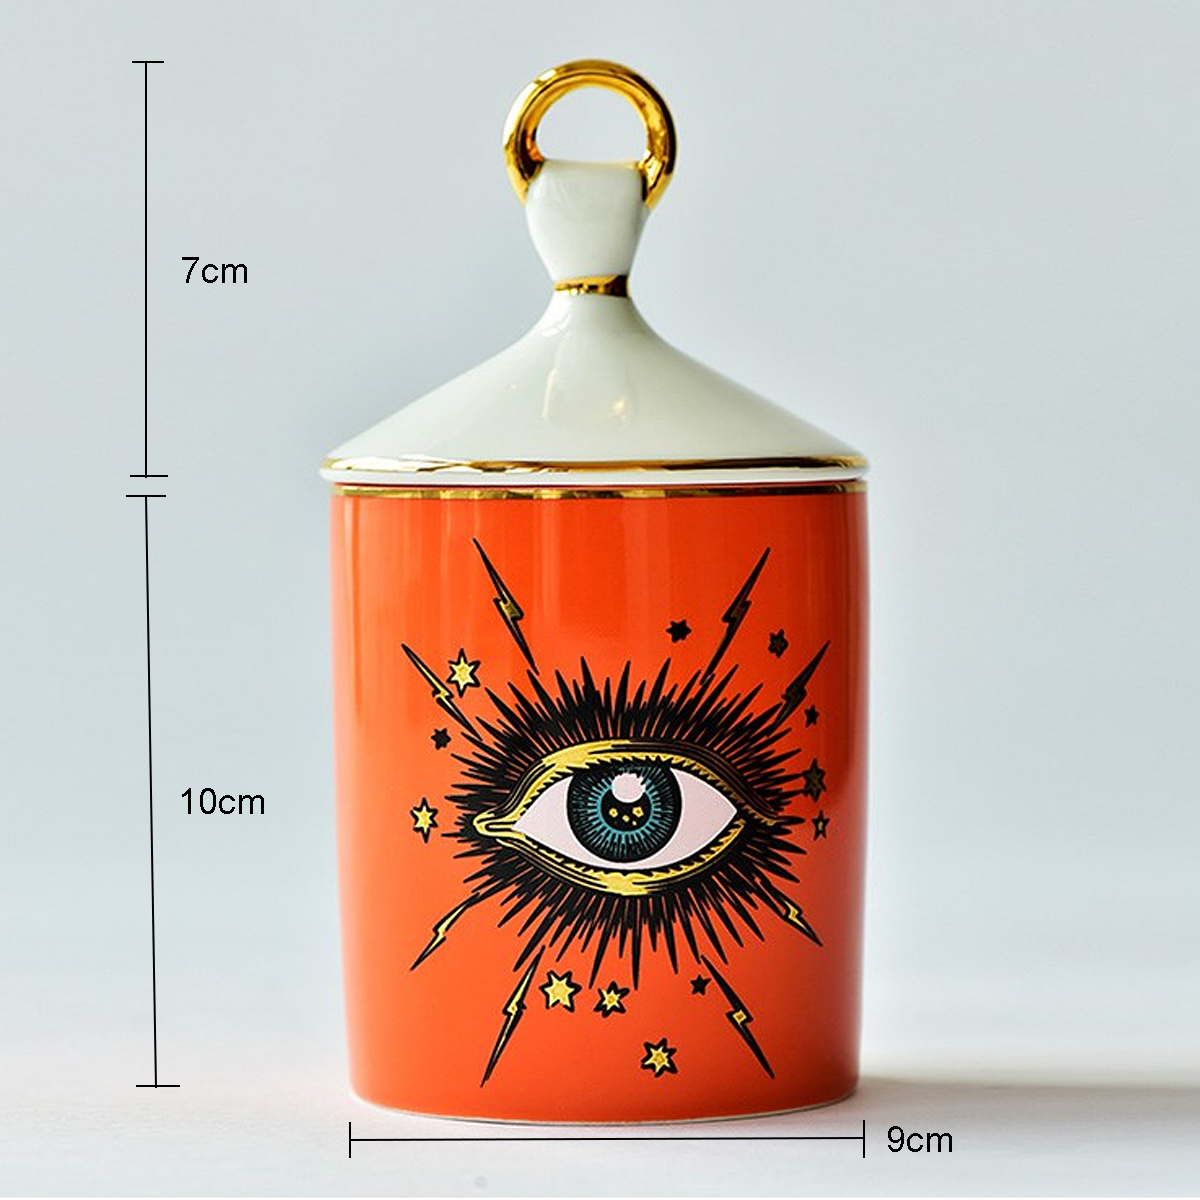 Big-Eyes-Jar-Hands-with-Ceramic-Lids-Decorative-Cans-Candle-Holders-Storage-Cans-Cosmetic-Storage-Ta-1649421-1